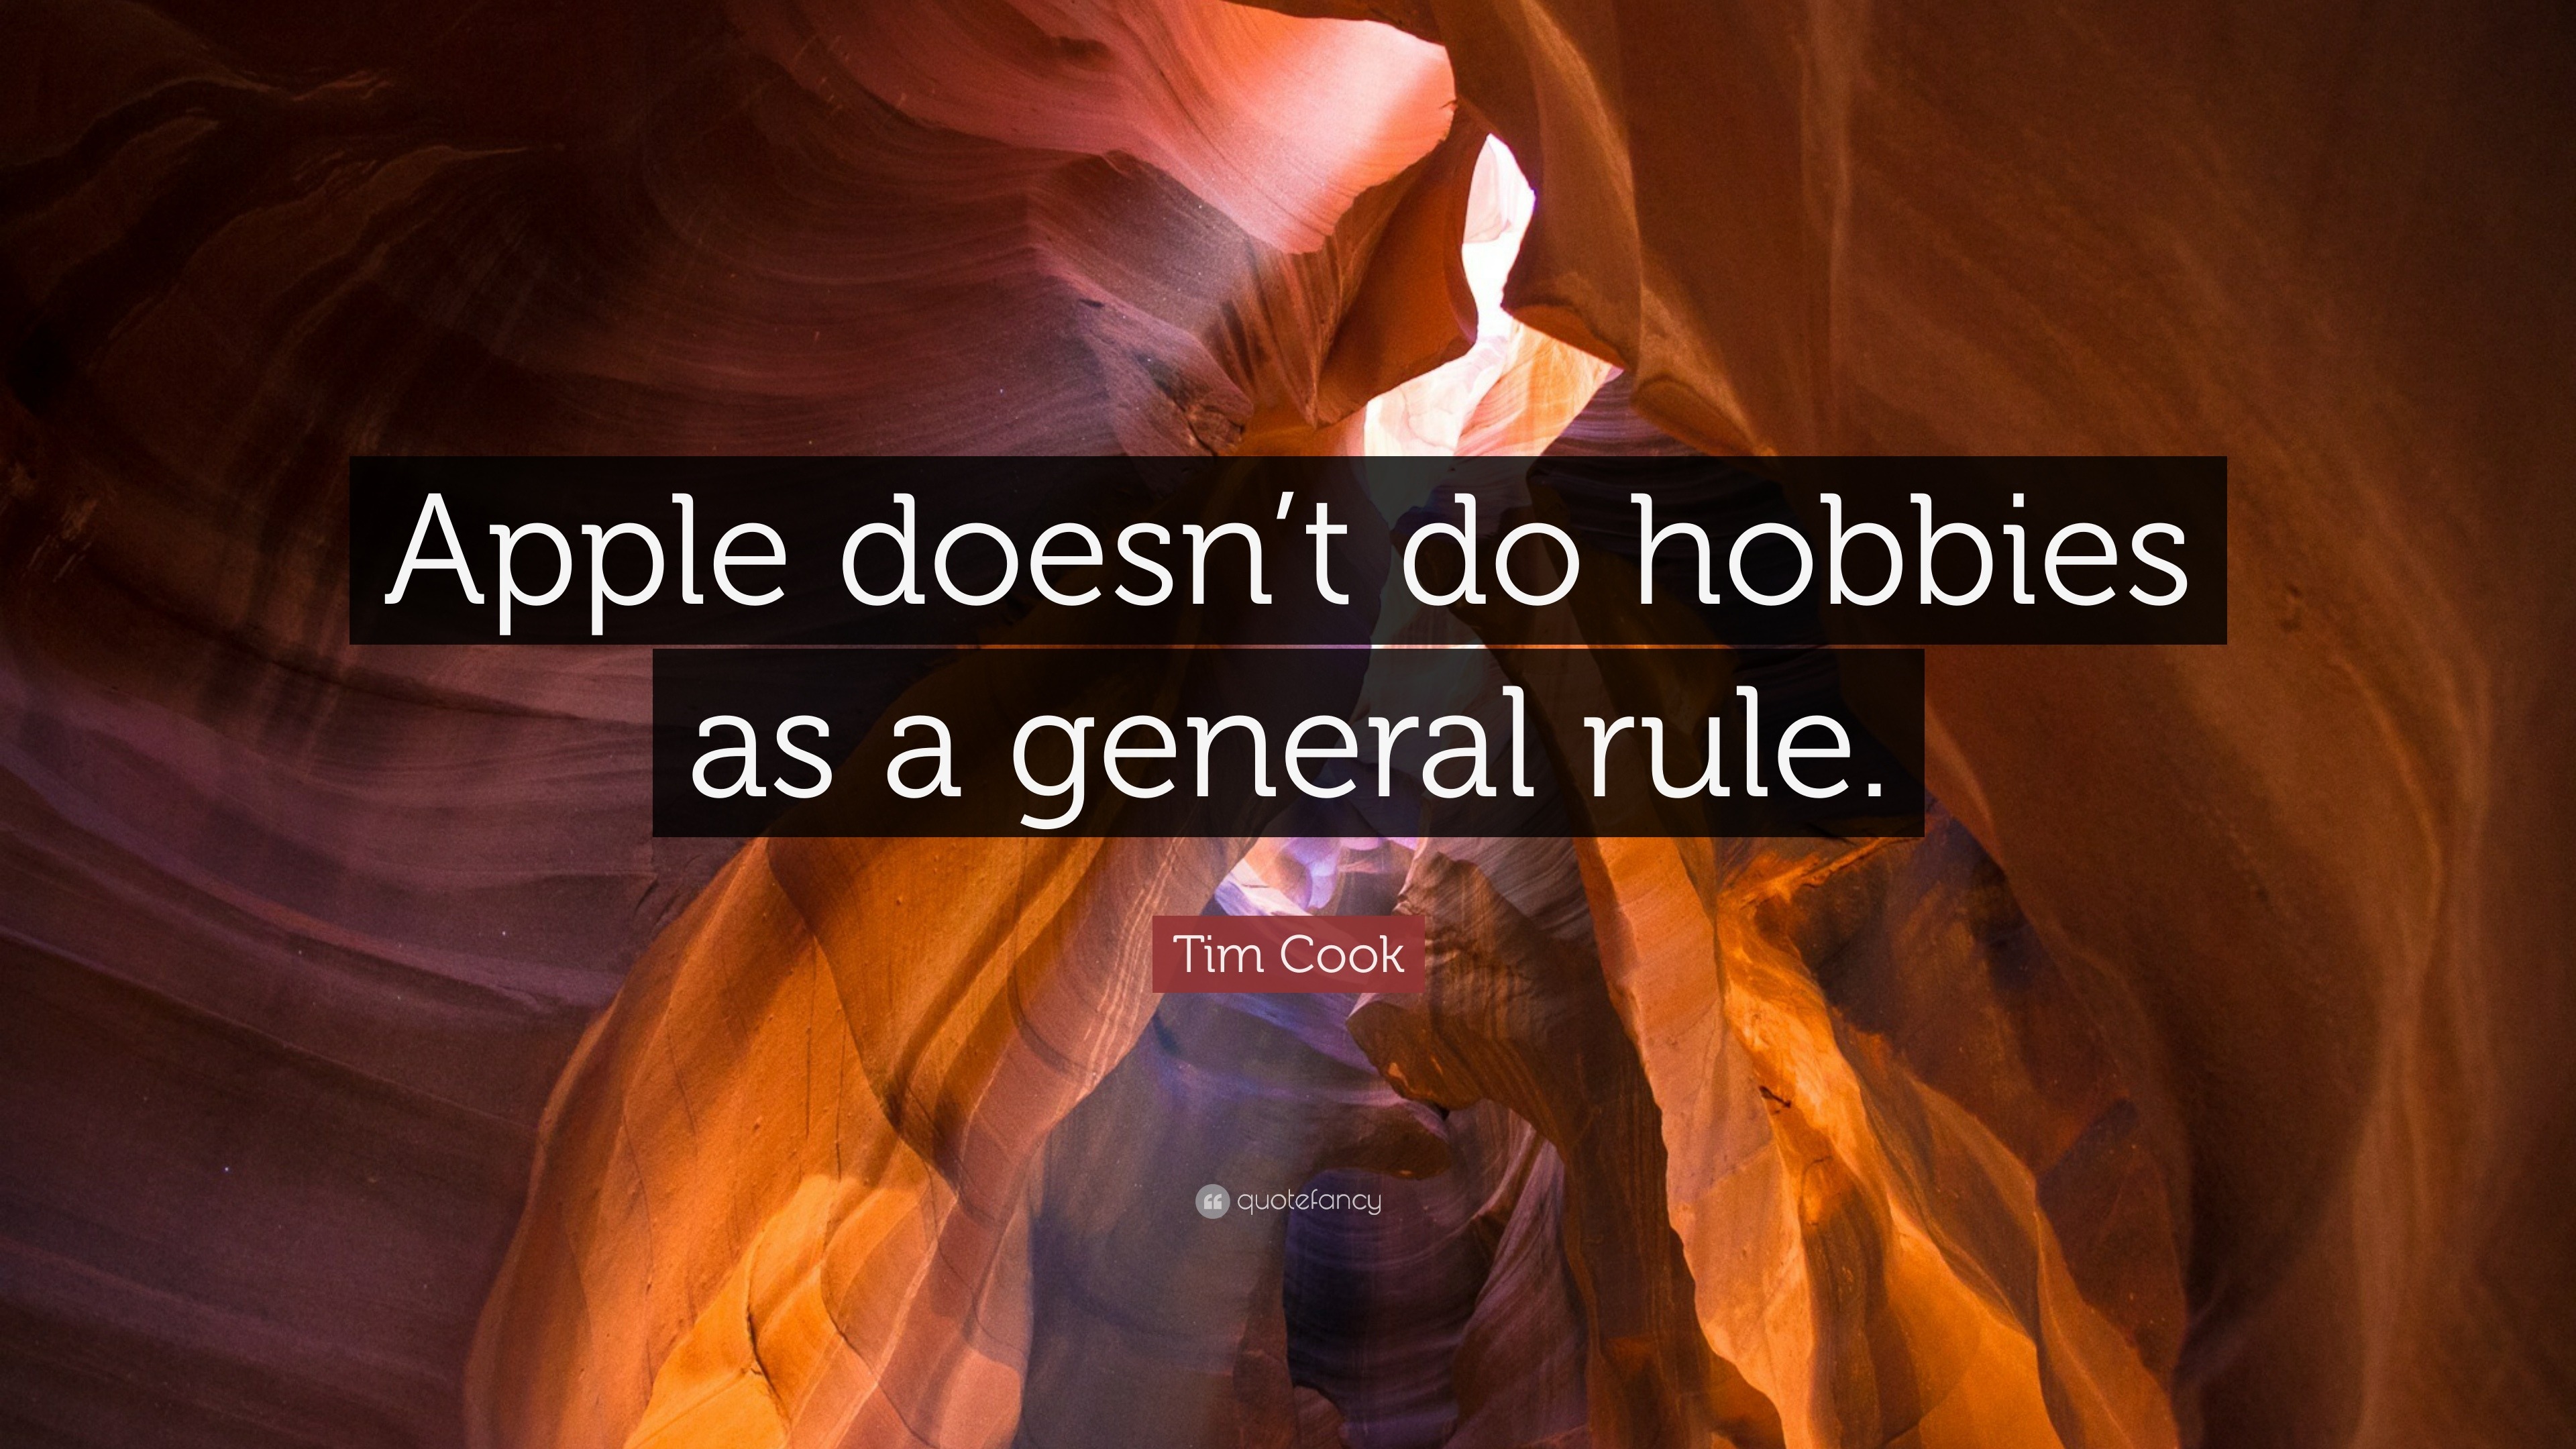 Tim Cook Quote: “Apple doesn’t do hobbies as a general rule.”